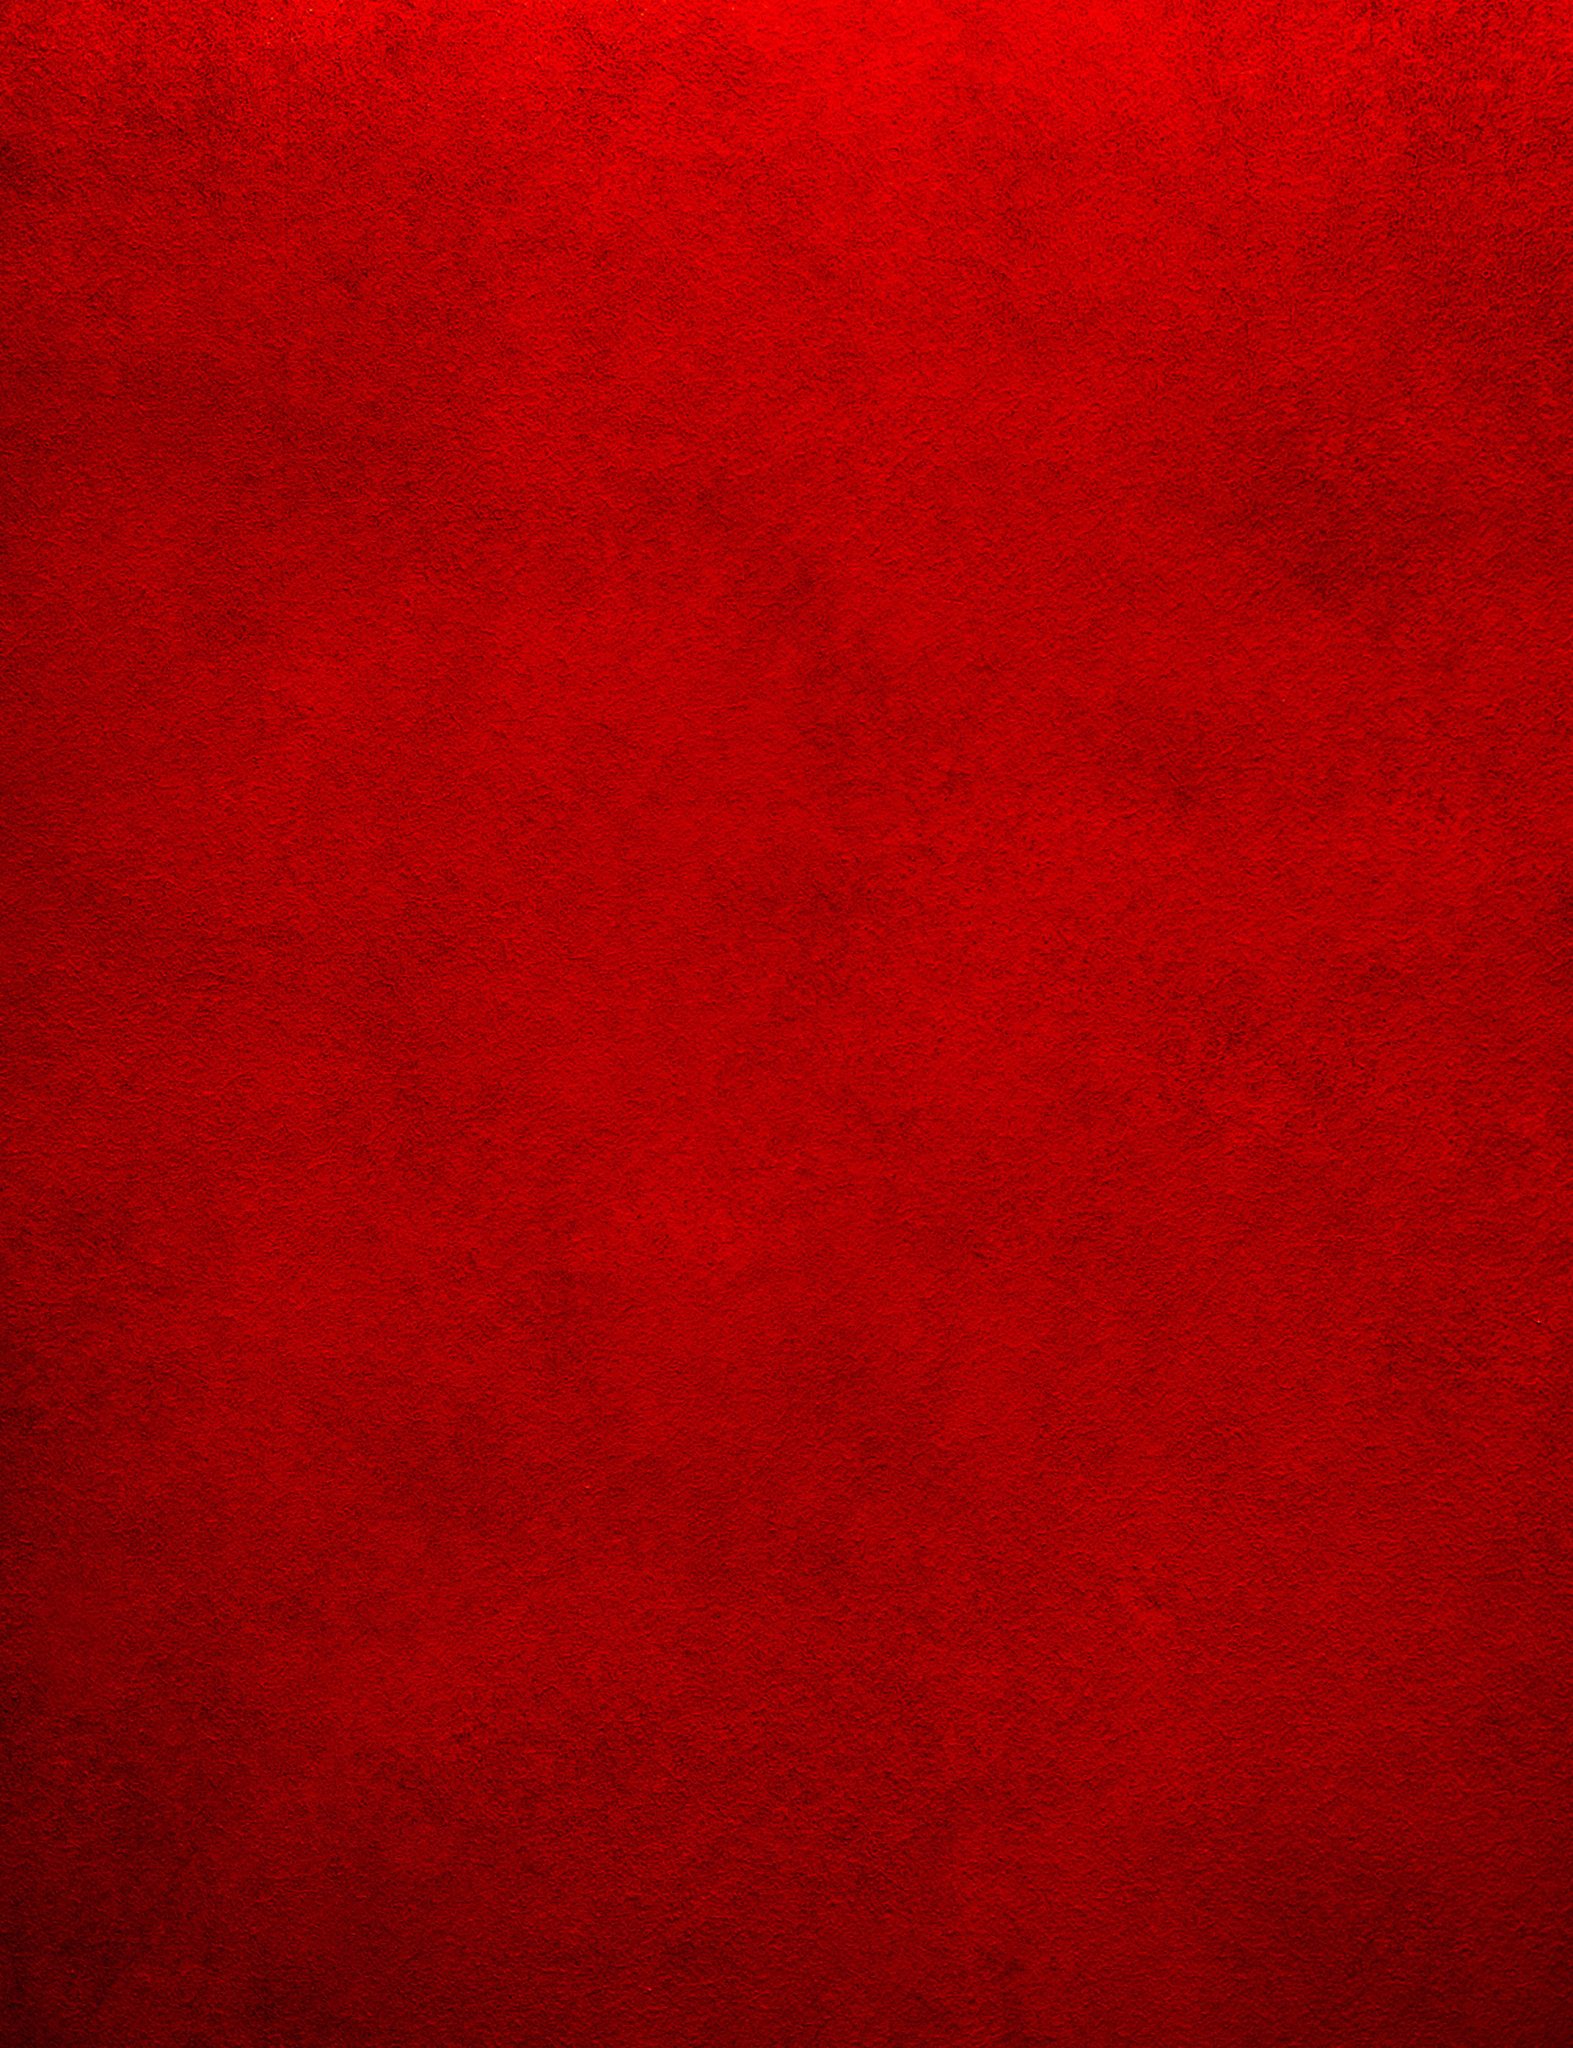 Paint red texture